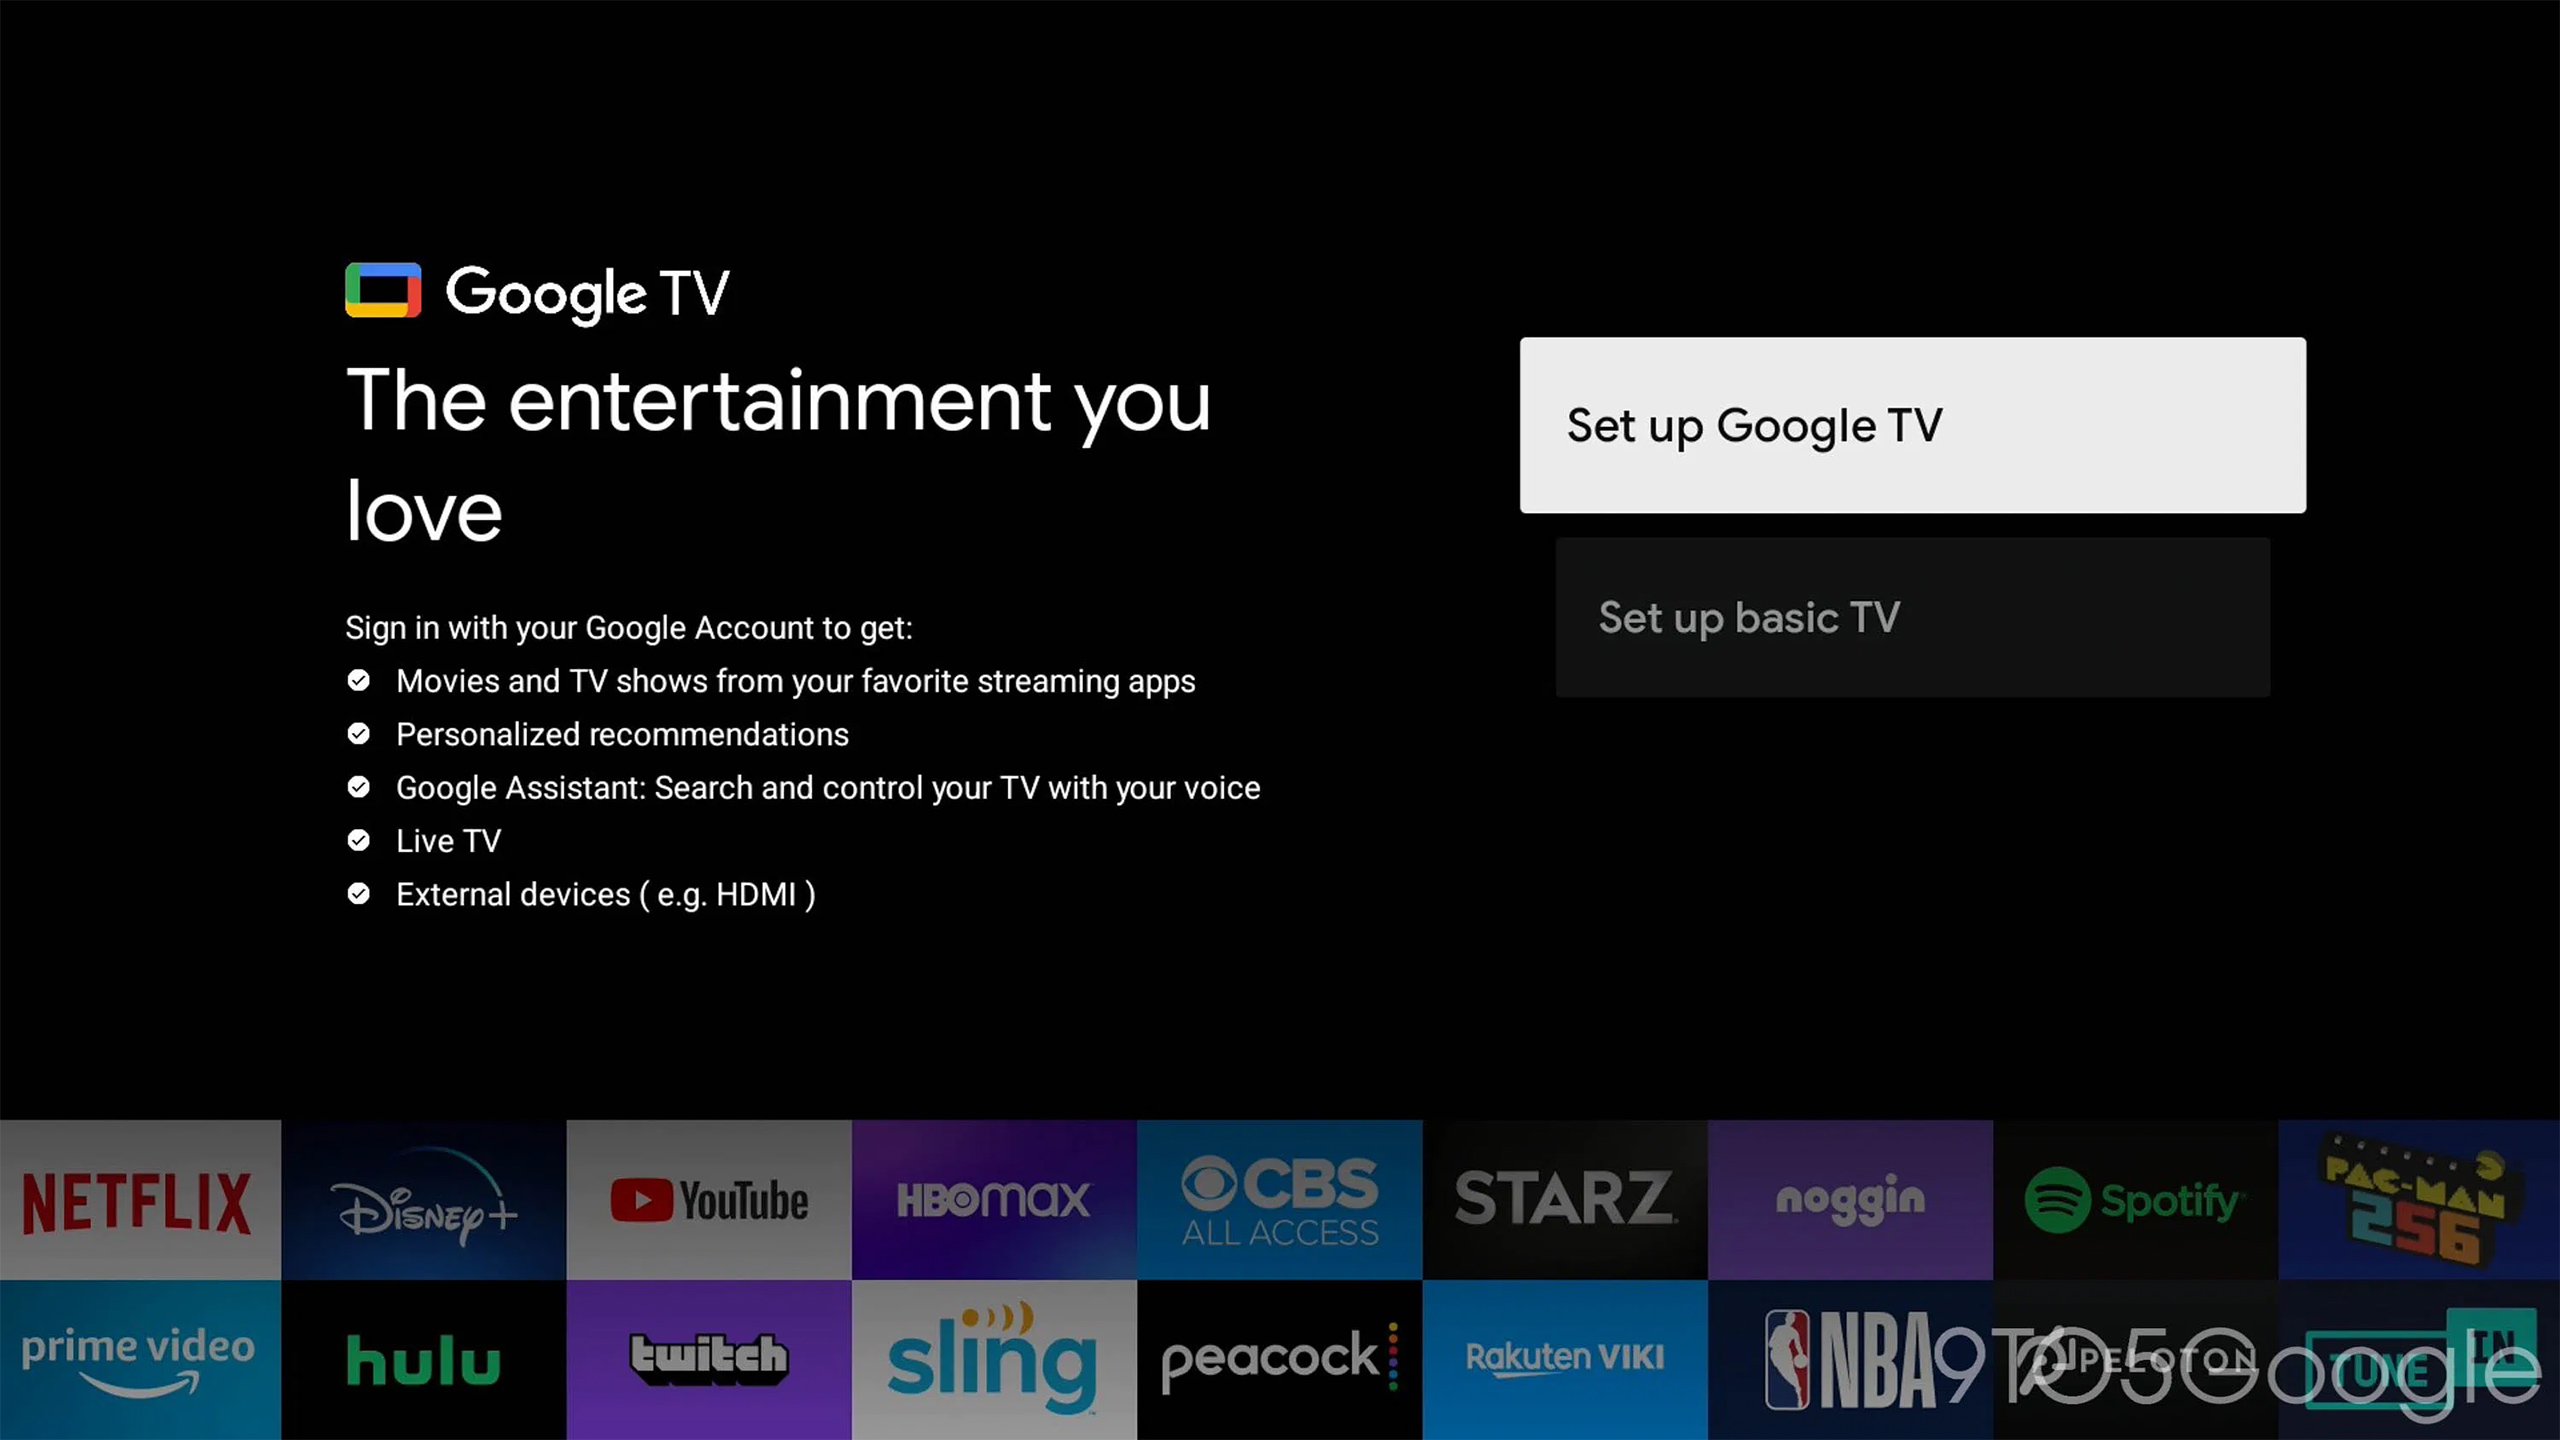 Google’s Smart TV software will have a “dumb TV” mode - Ars Technica